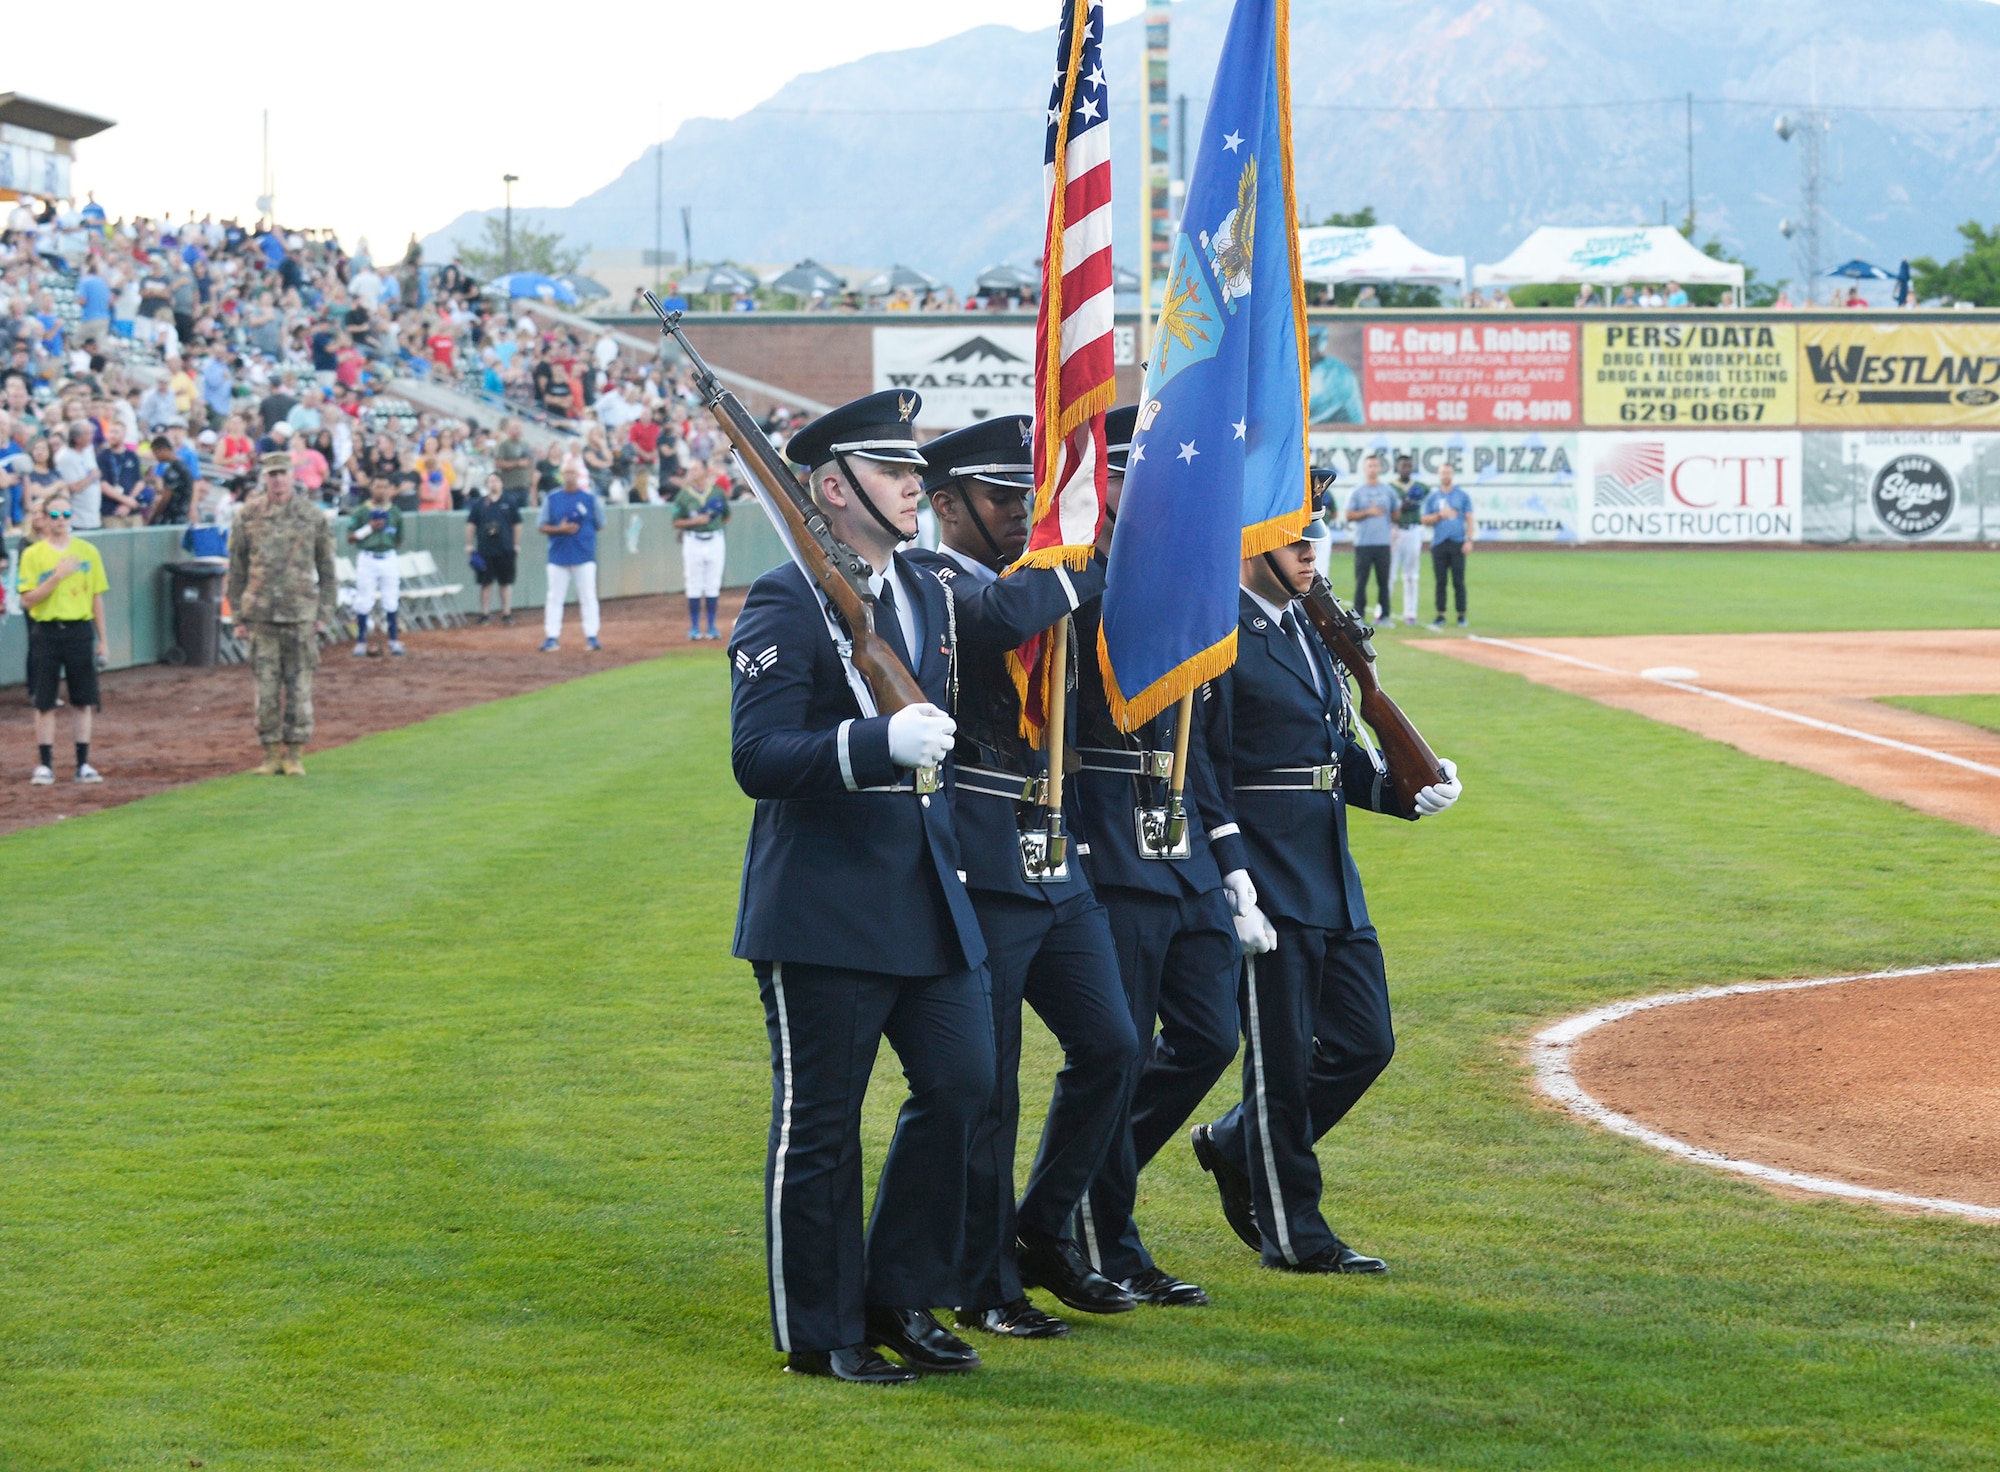 The Hill Air Force Base Honor Guard marches onto the field to present the colors during the Aug. 9, 2019, Military Appreciation Night with the Ogden Raptors and Idaho Falls Chuckars at Lindquist Field in Ogden, Utah. Each year, the Raptors team up with the Top of Utah Military Affairs Committee to offer tickets to Hill Air Force Base personnel and their families. (U.S. Air Force photo by David Perry)